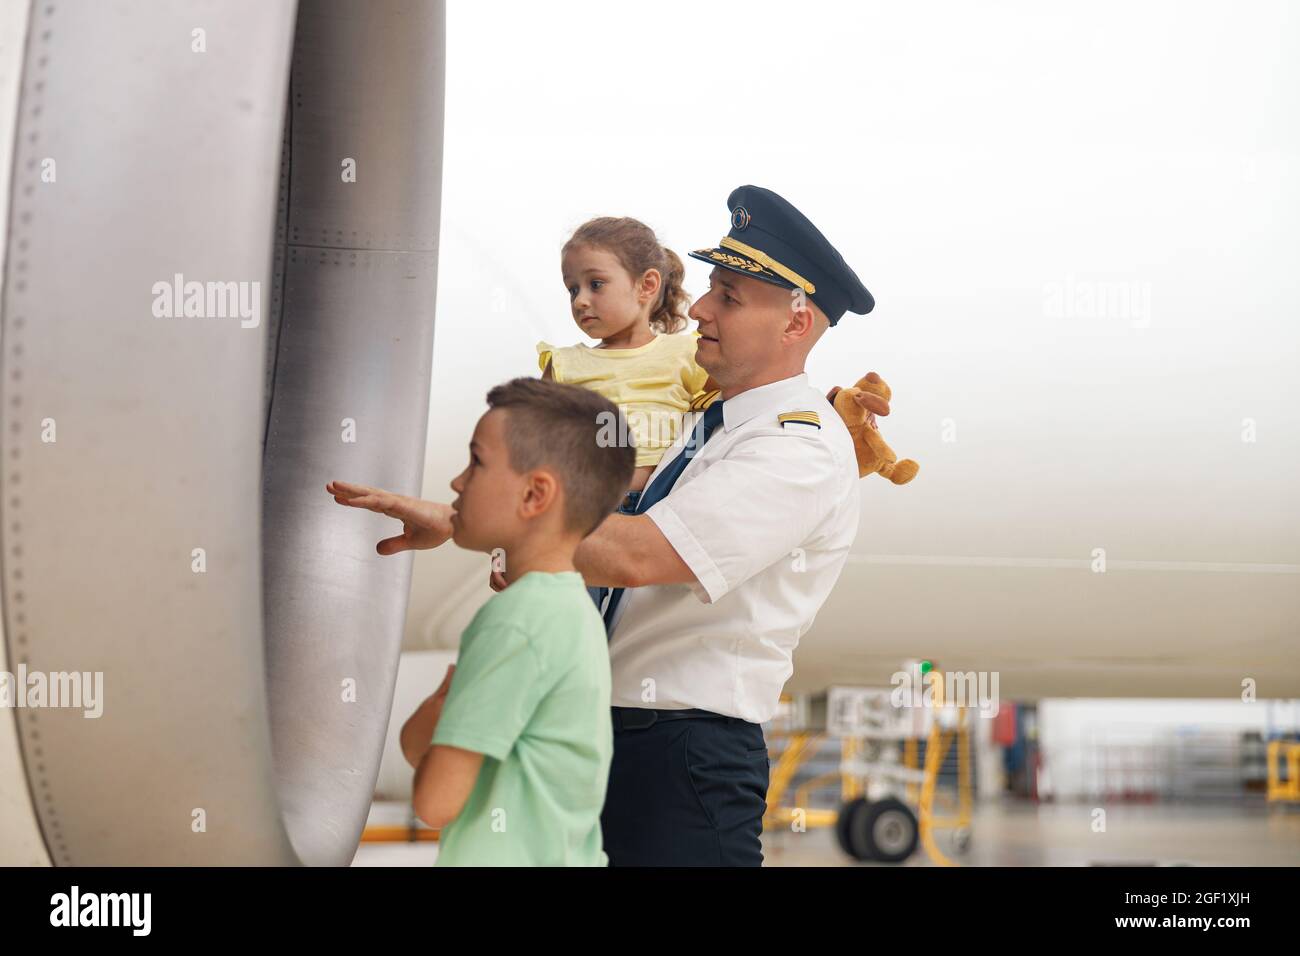 Pilot in uniform showing parts of airplane to two little kids who came to excursion at the aircraft hangar Stock Photo